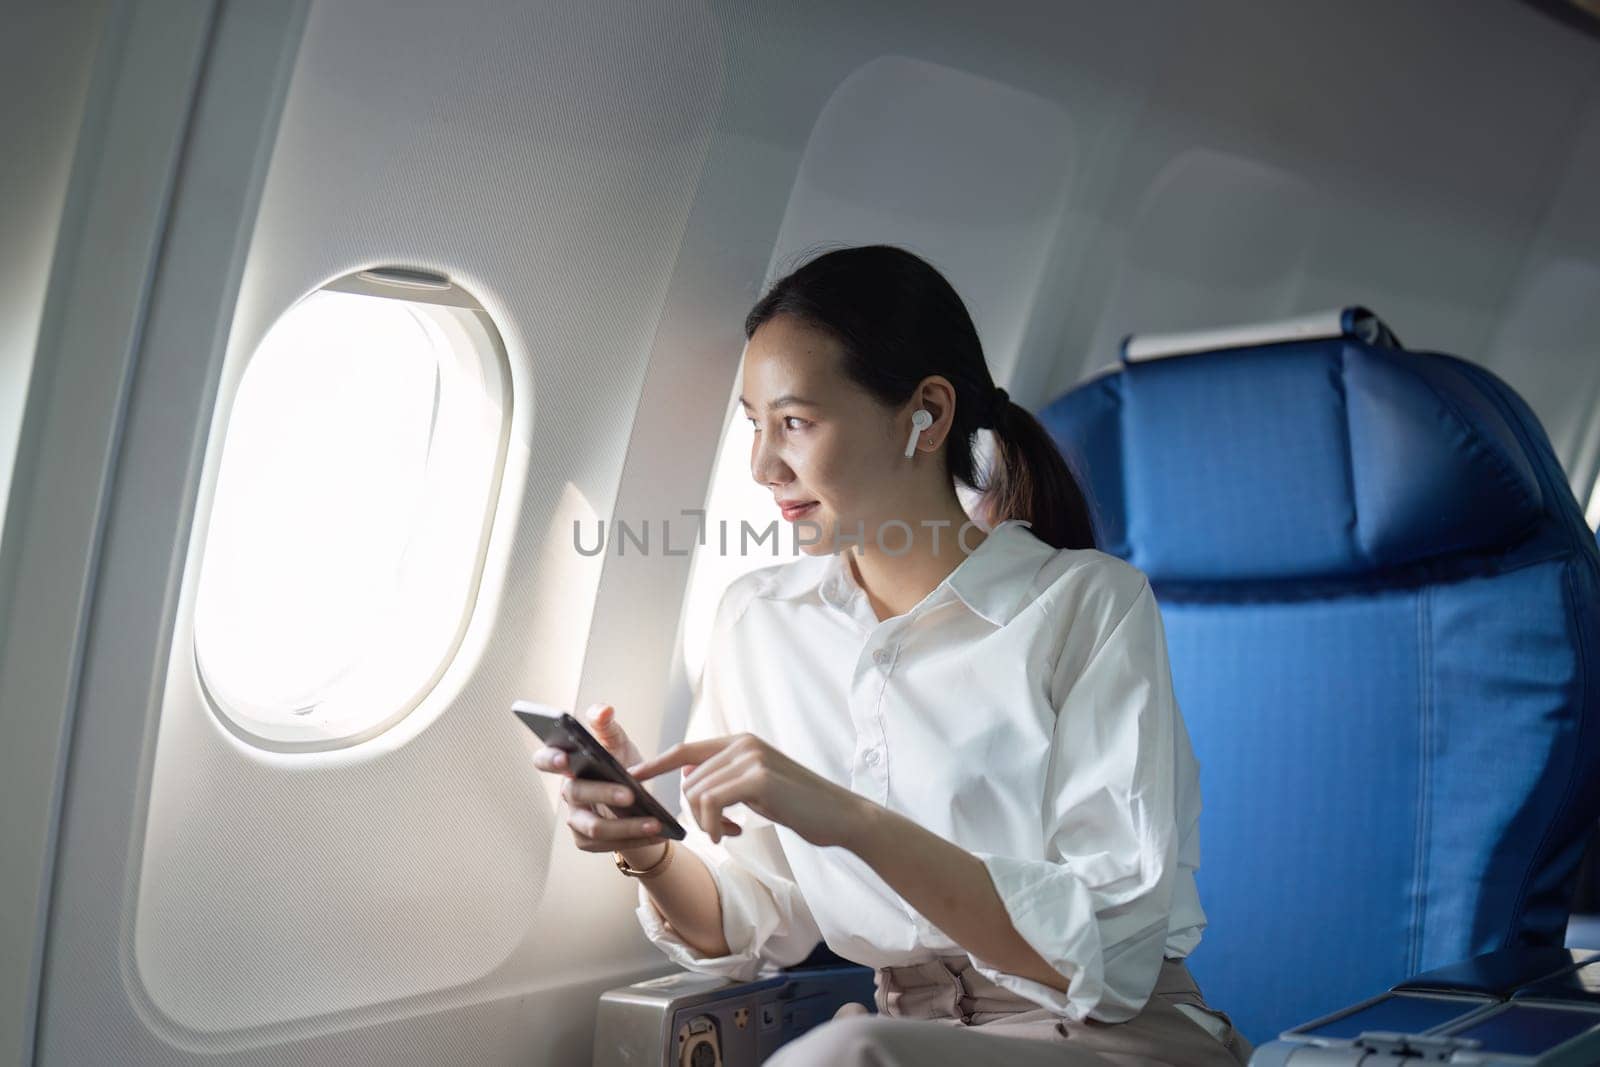 A woman is sitting on an airplane with her phone in her hand. She is looking at the screen and pointing at something